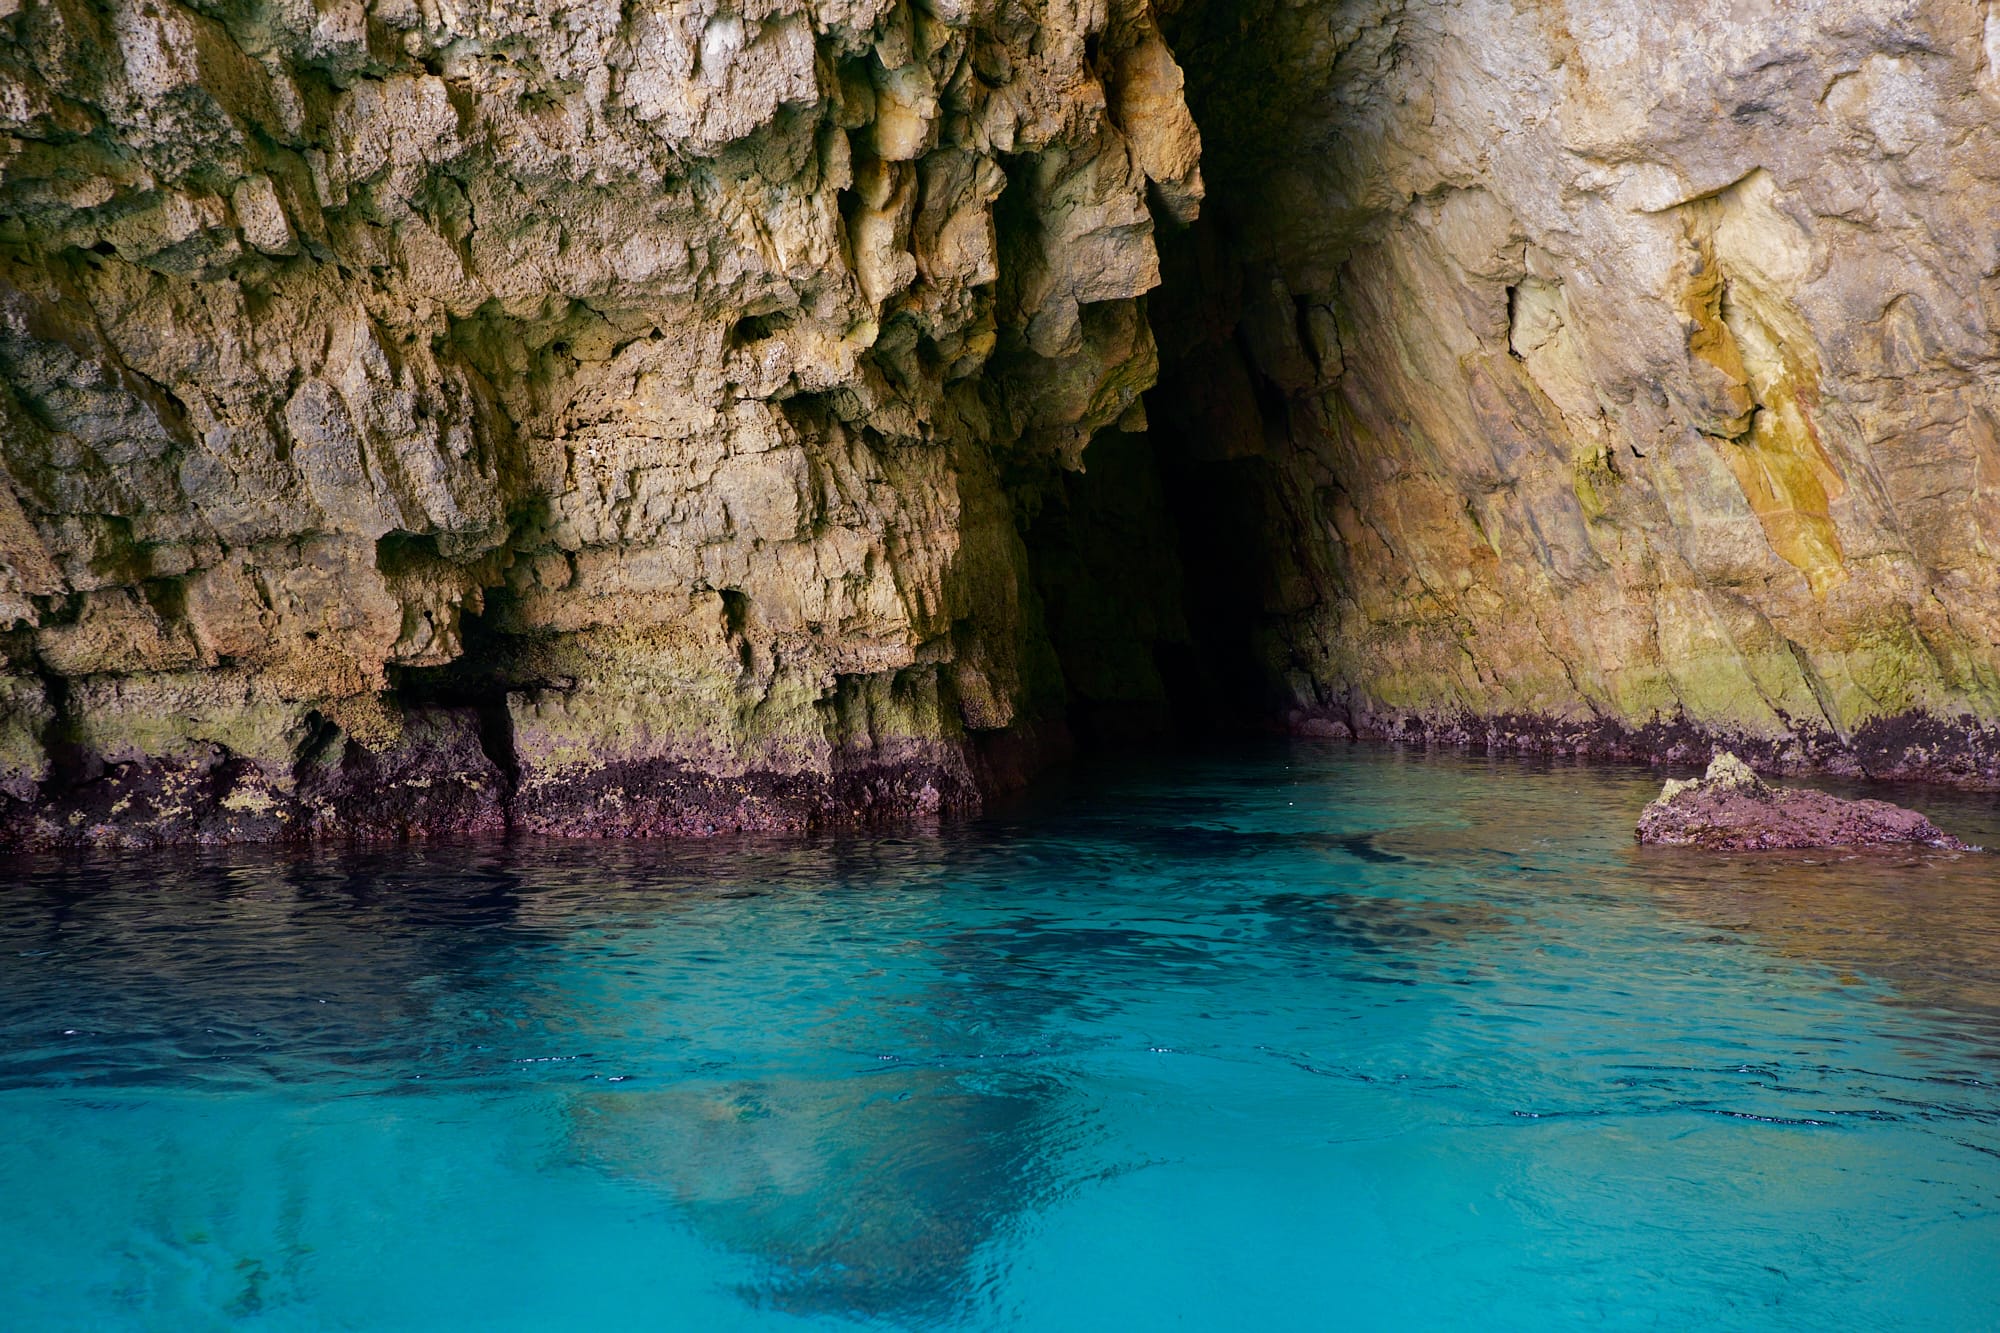 blue water in the Grotto, with purple waterline visible